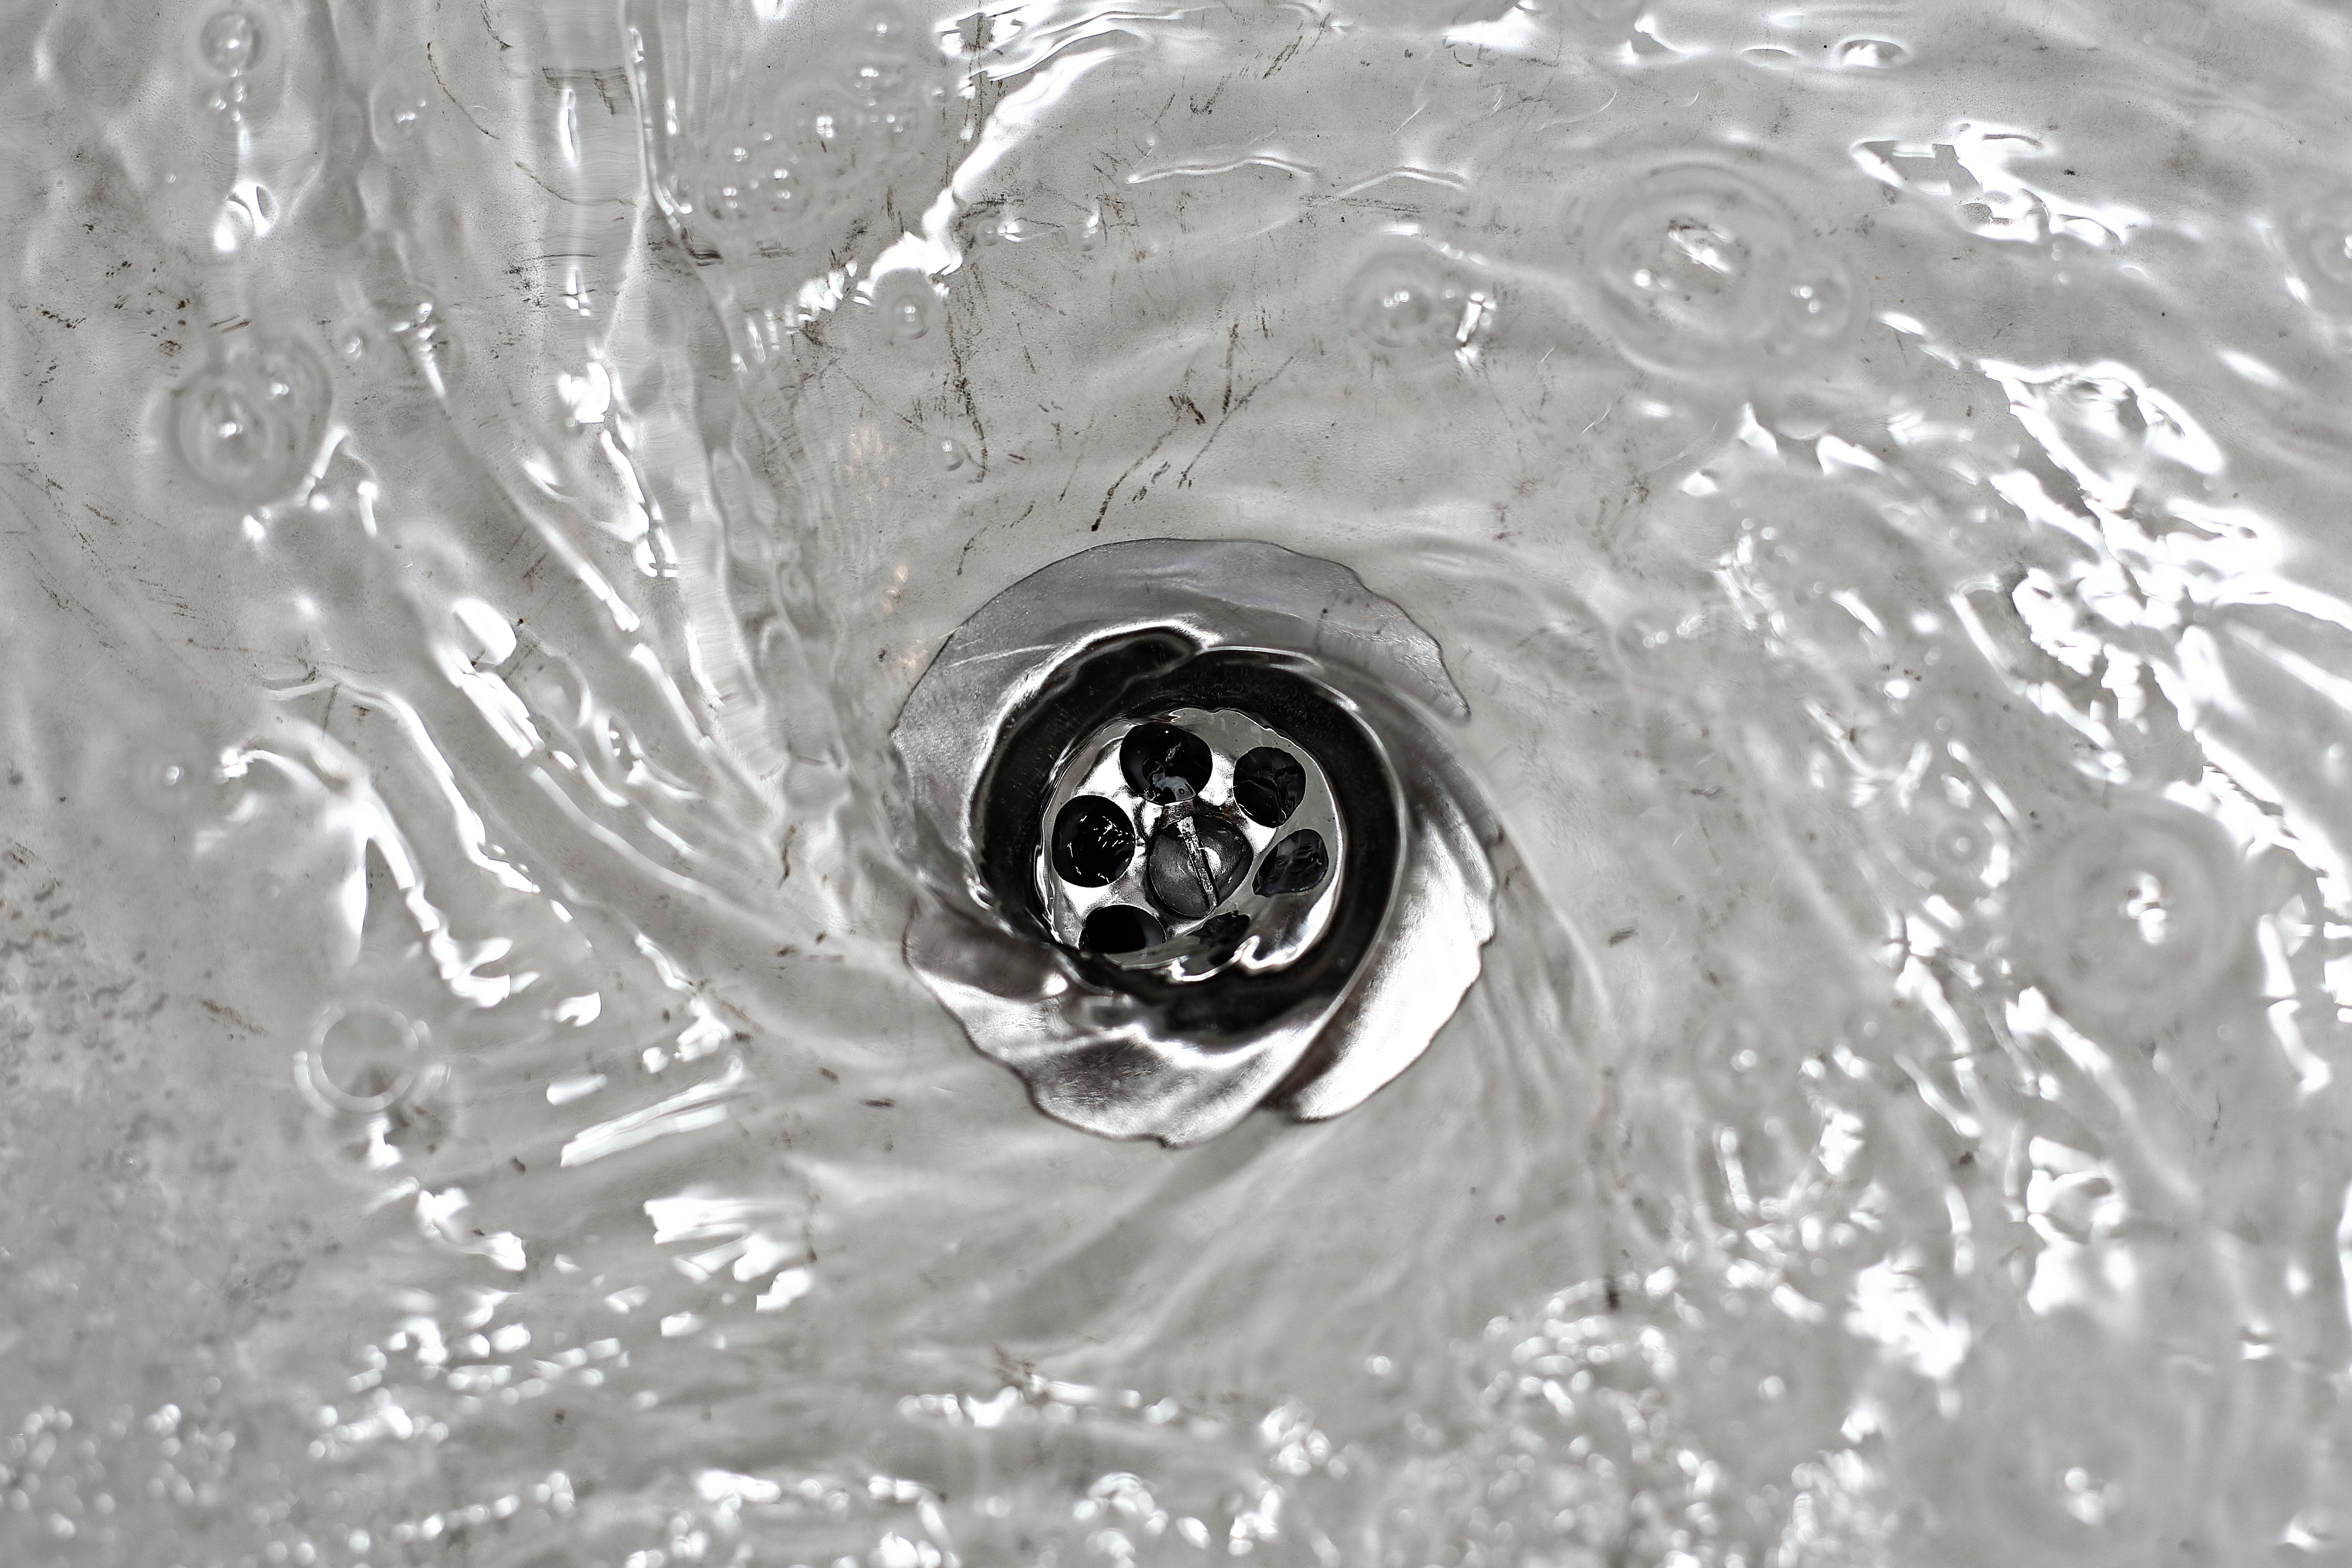 Why Do I Need to Clean My Drains?